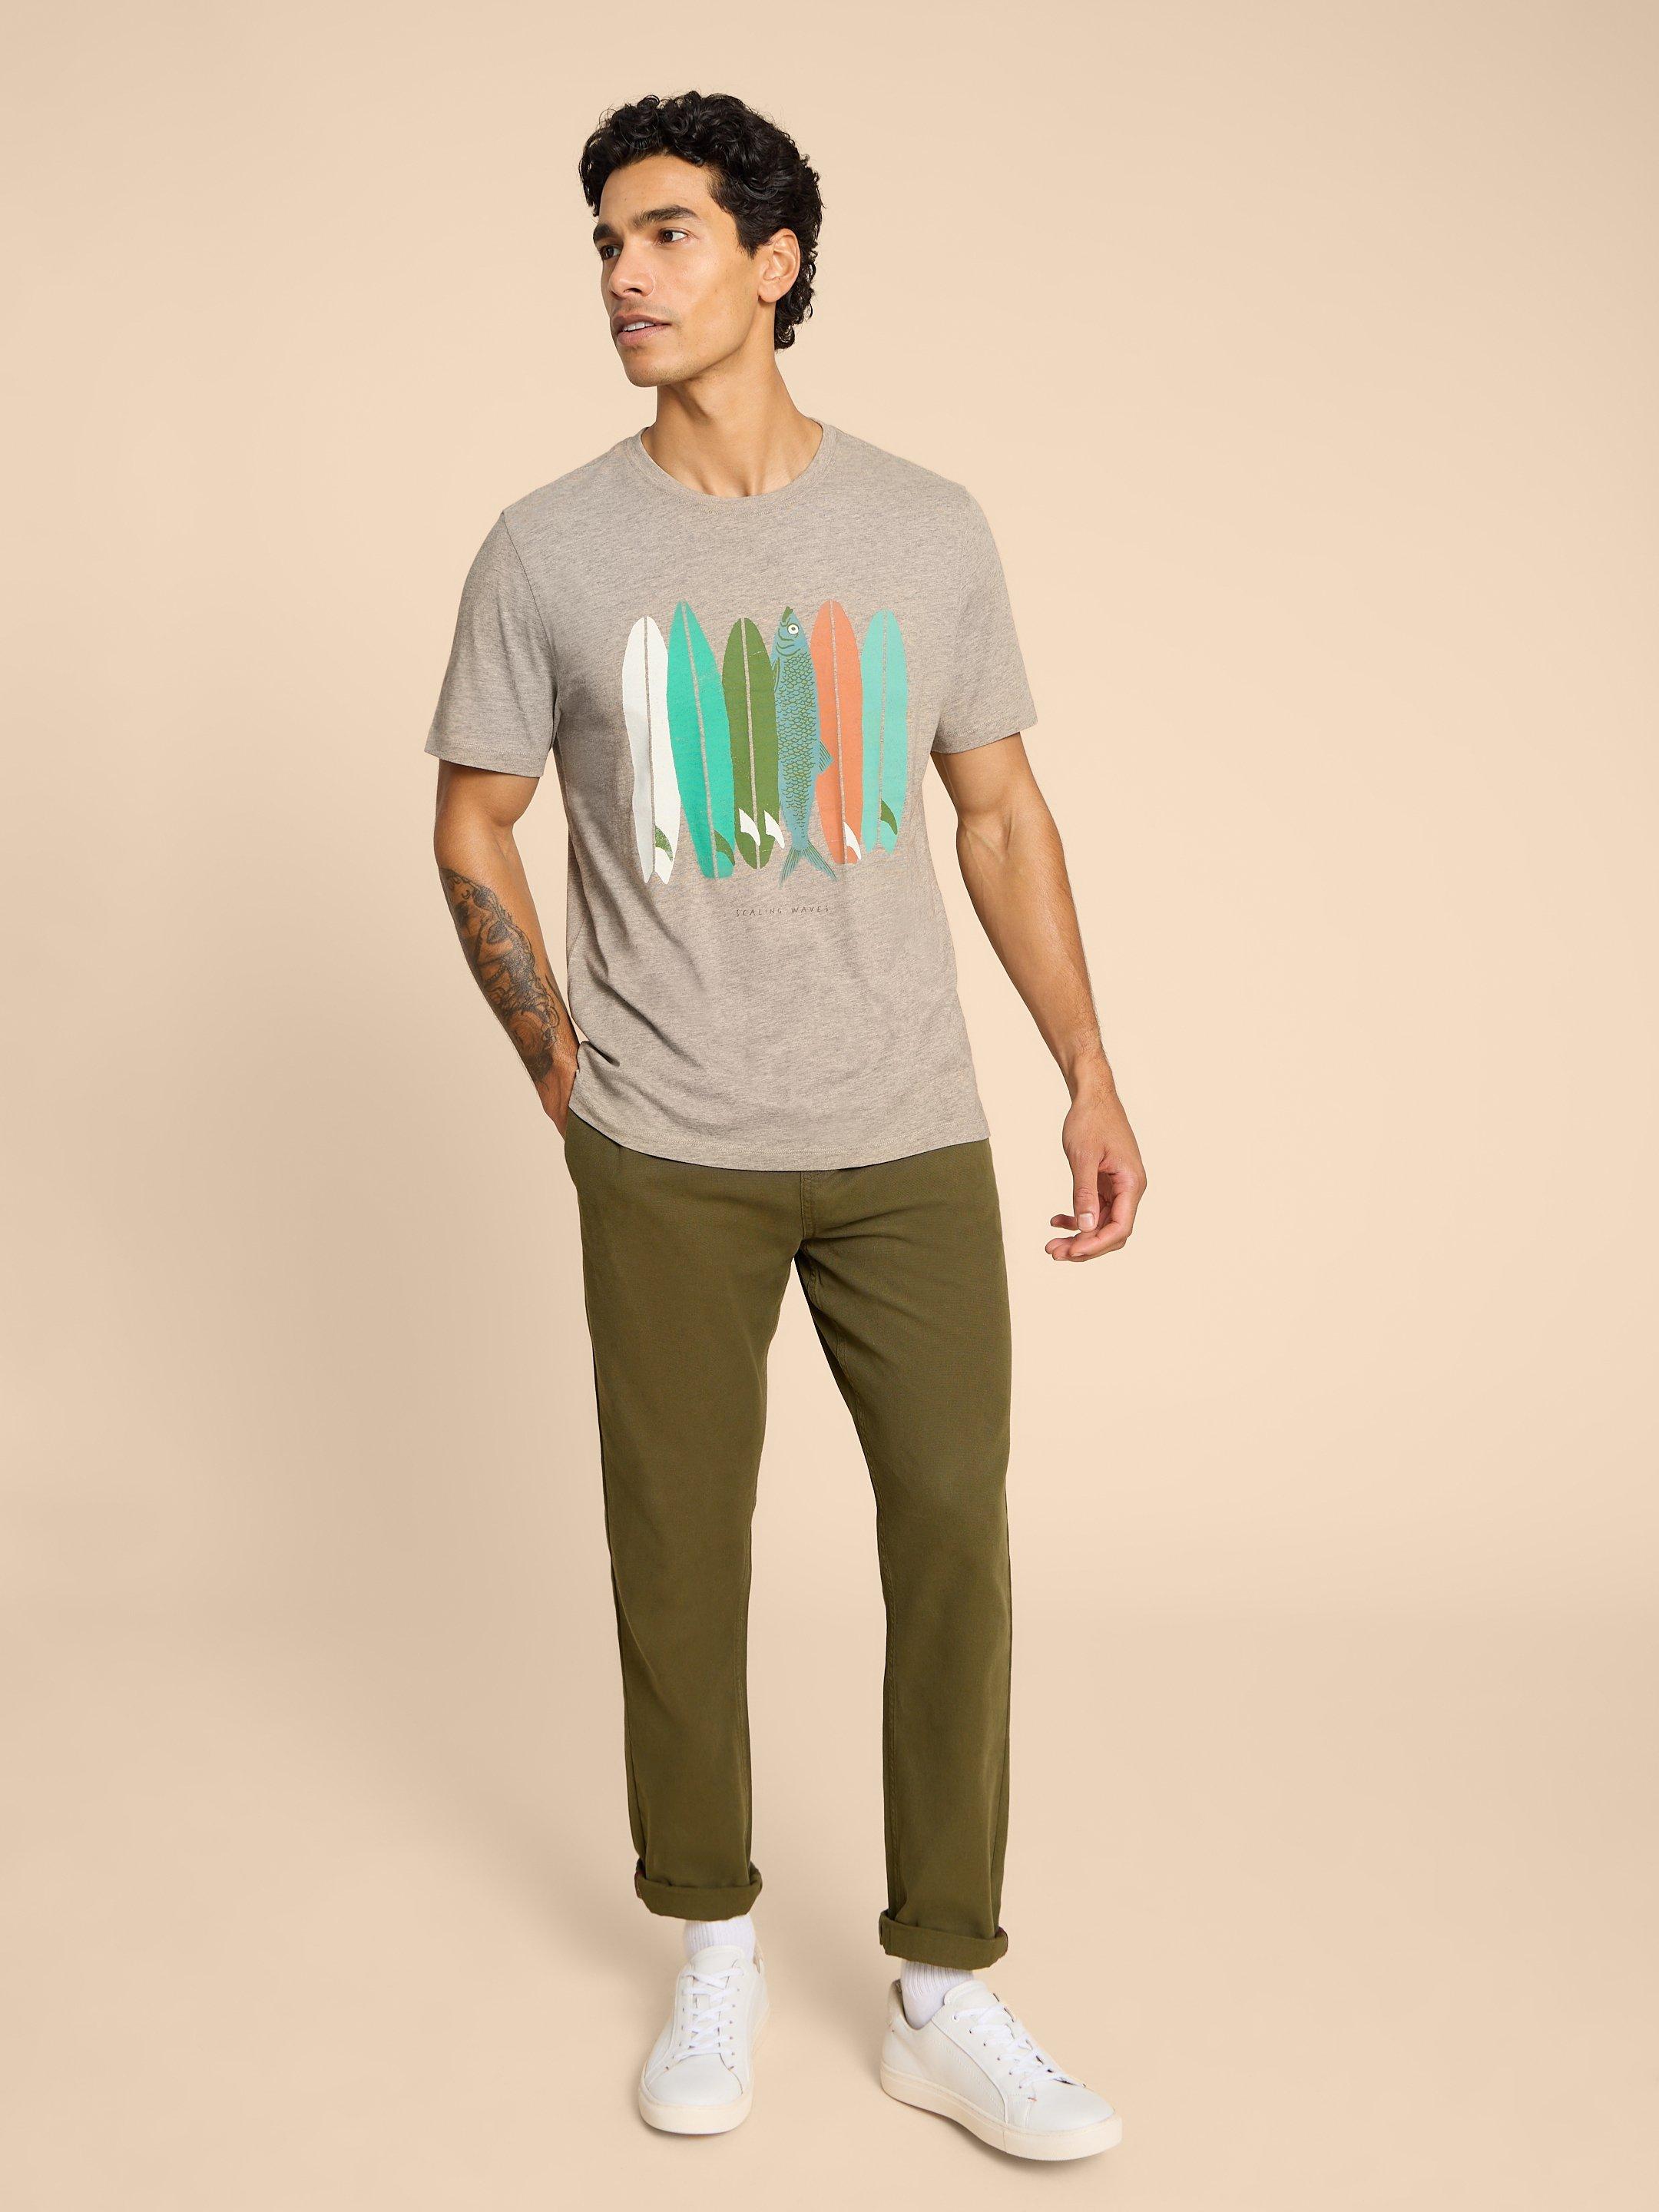 Scaling Waves Graphic Tee in GREY PR - MODEL FRONT